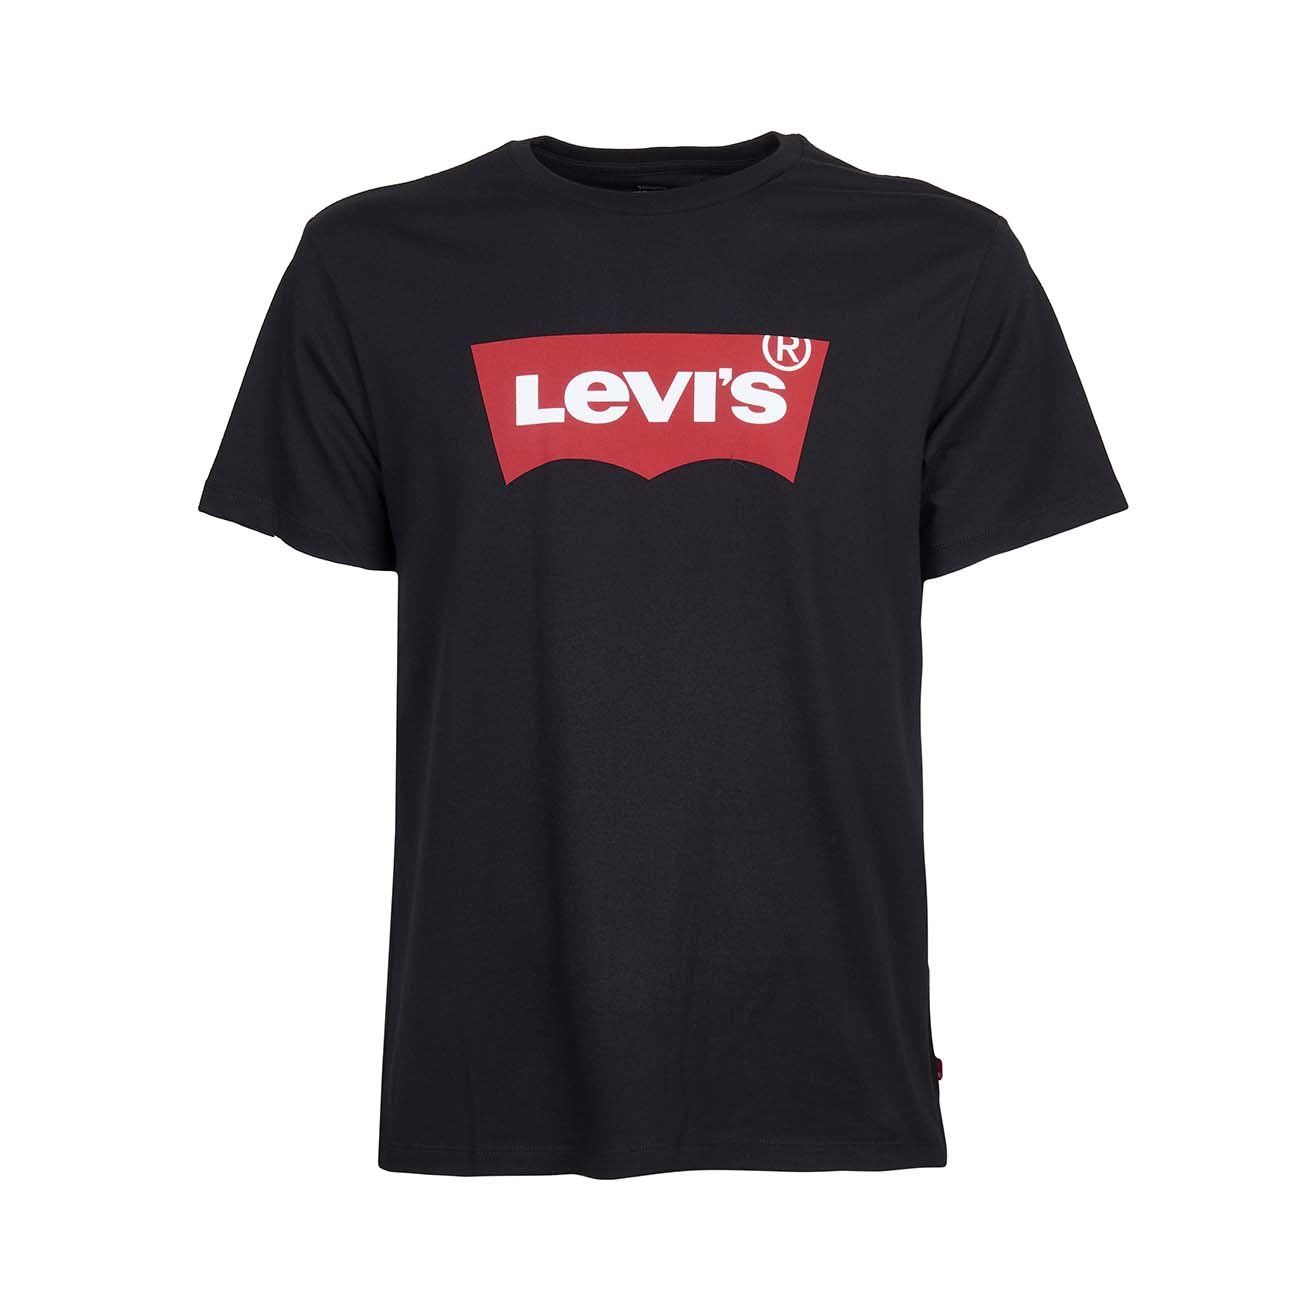 Top 74+ imagen levi’s black and red t shirt